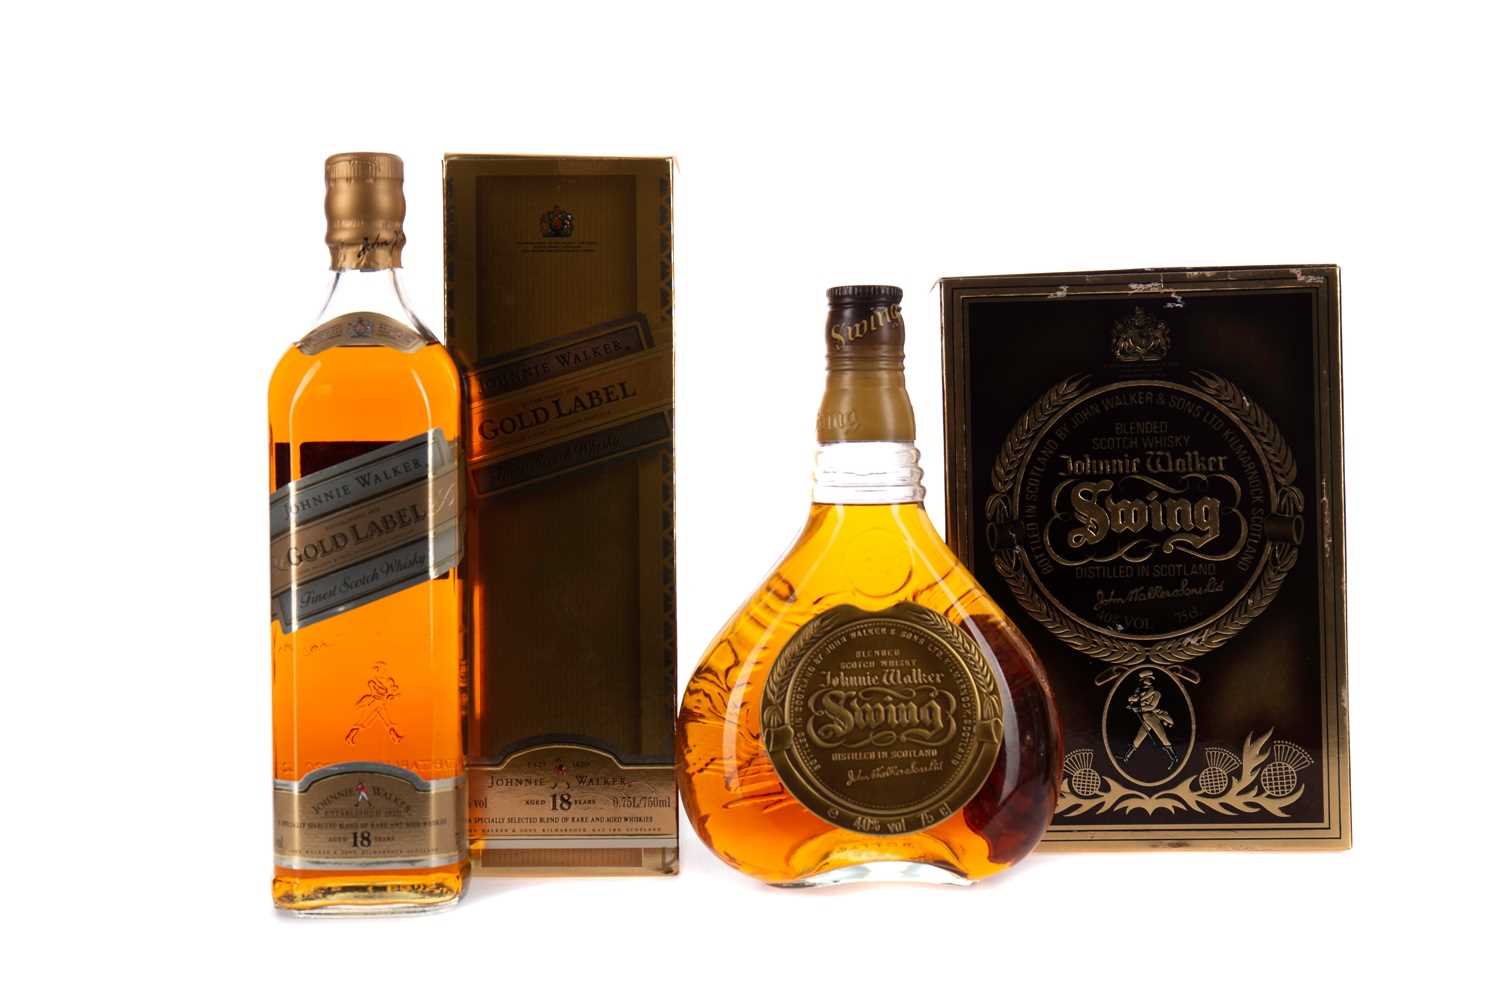 Lot 94 - JOHNNIE WALKER GOLD LABEL AGED 18 YEARS, AND JOHNNIE WALKER SWING